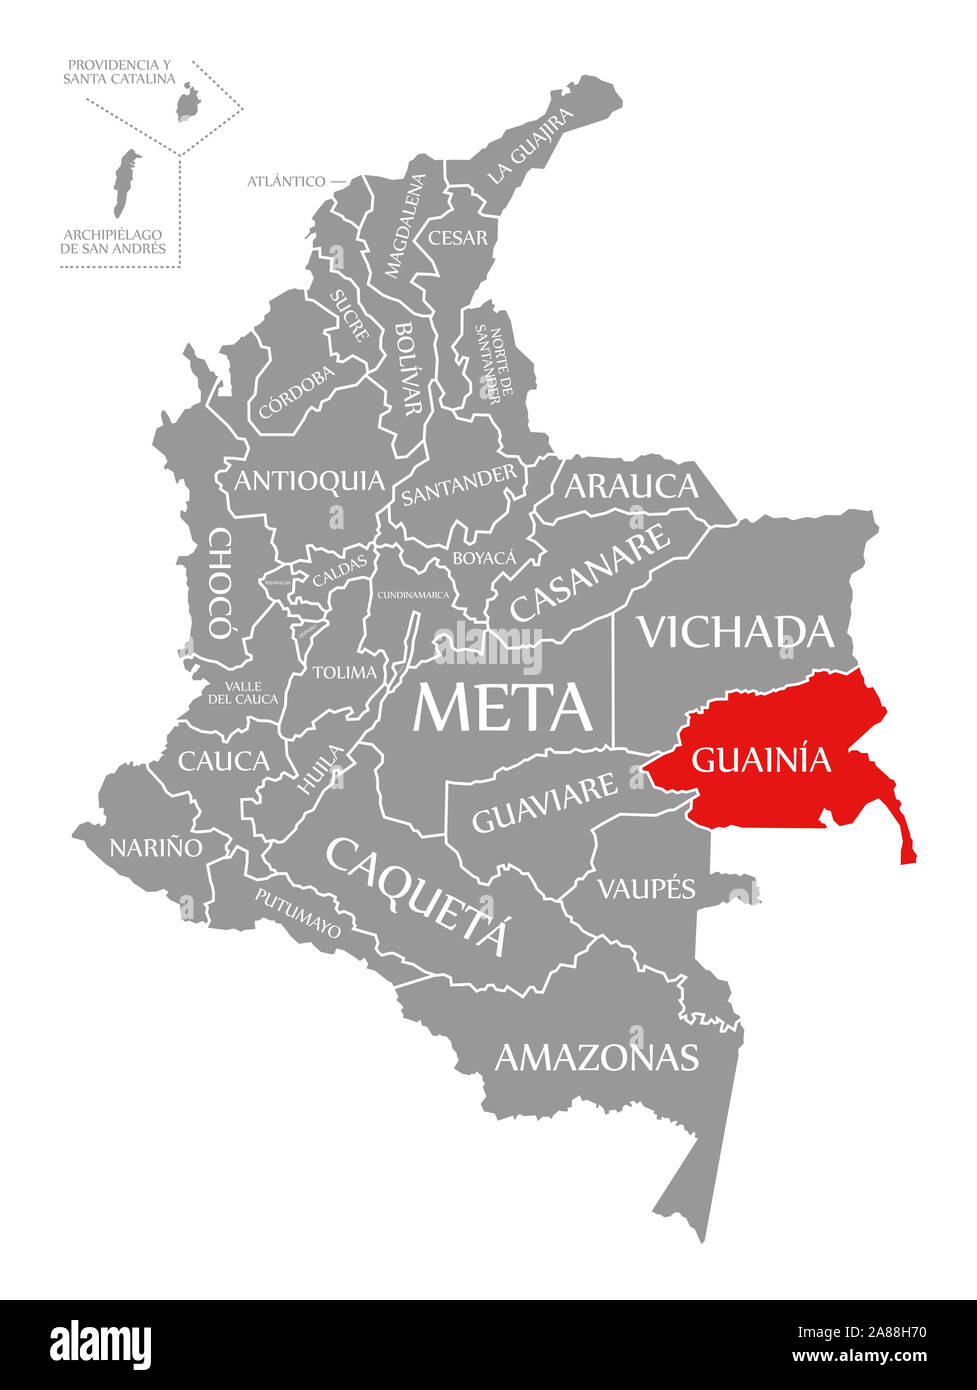 Guainia red highlighted in map of Colombia Stock Photo